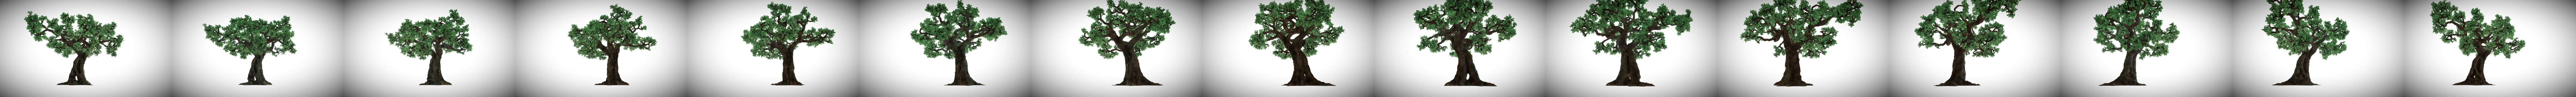 Minecraft Giant Oak Tree 3d Model By Plutouthere Plutouthere